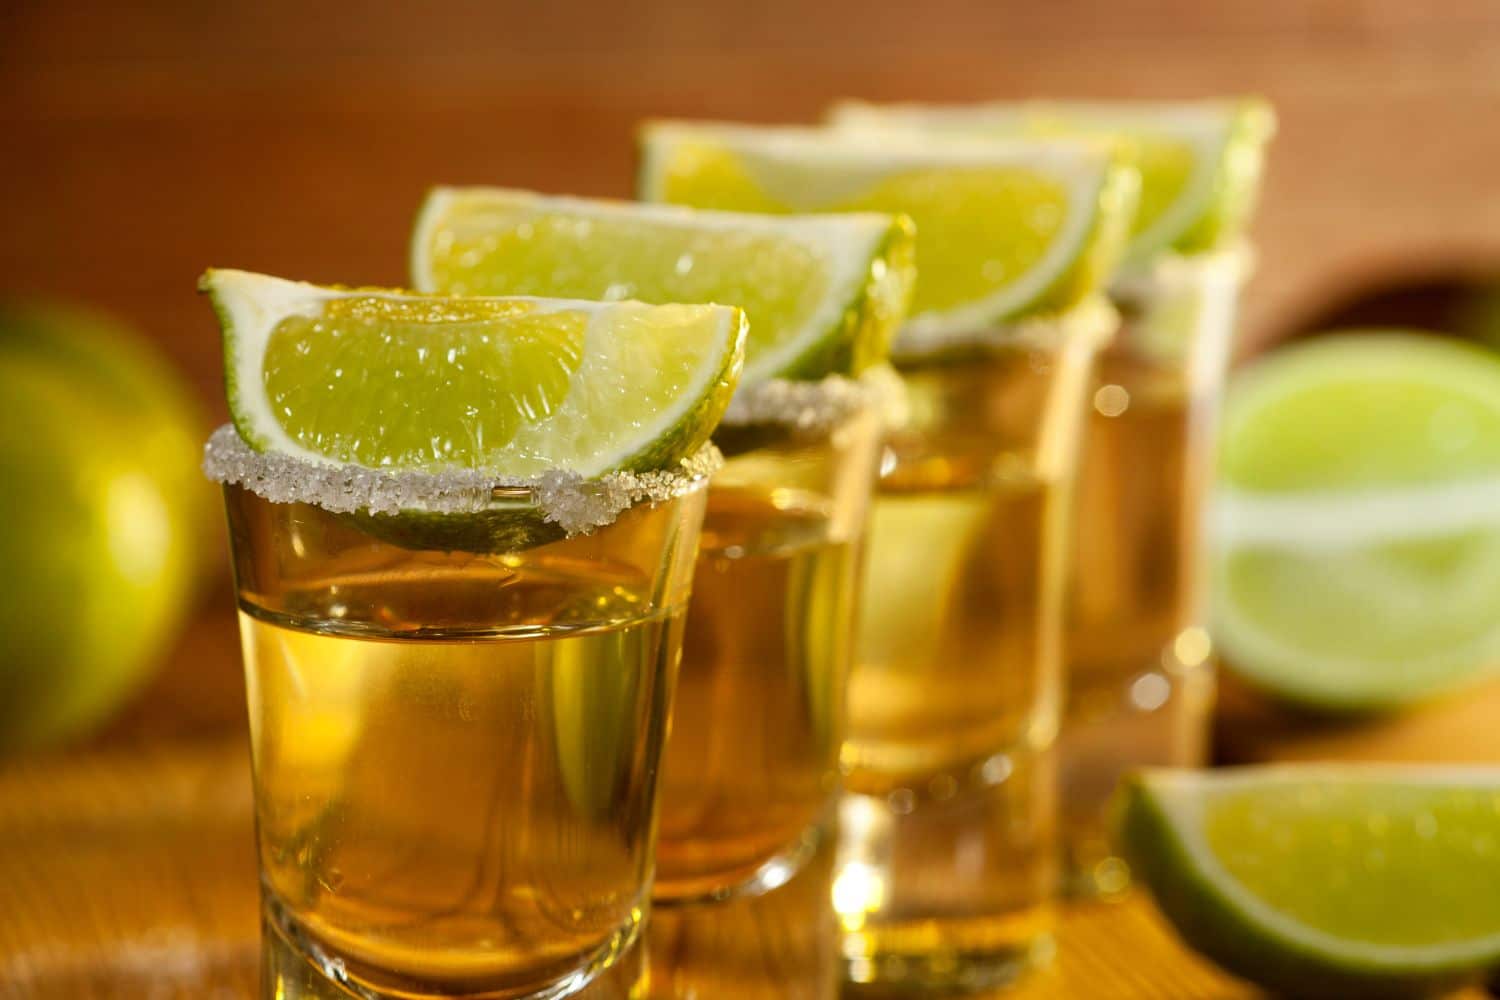 How To Order Tequila